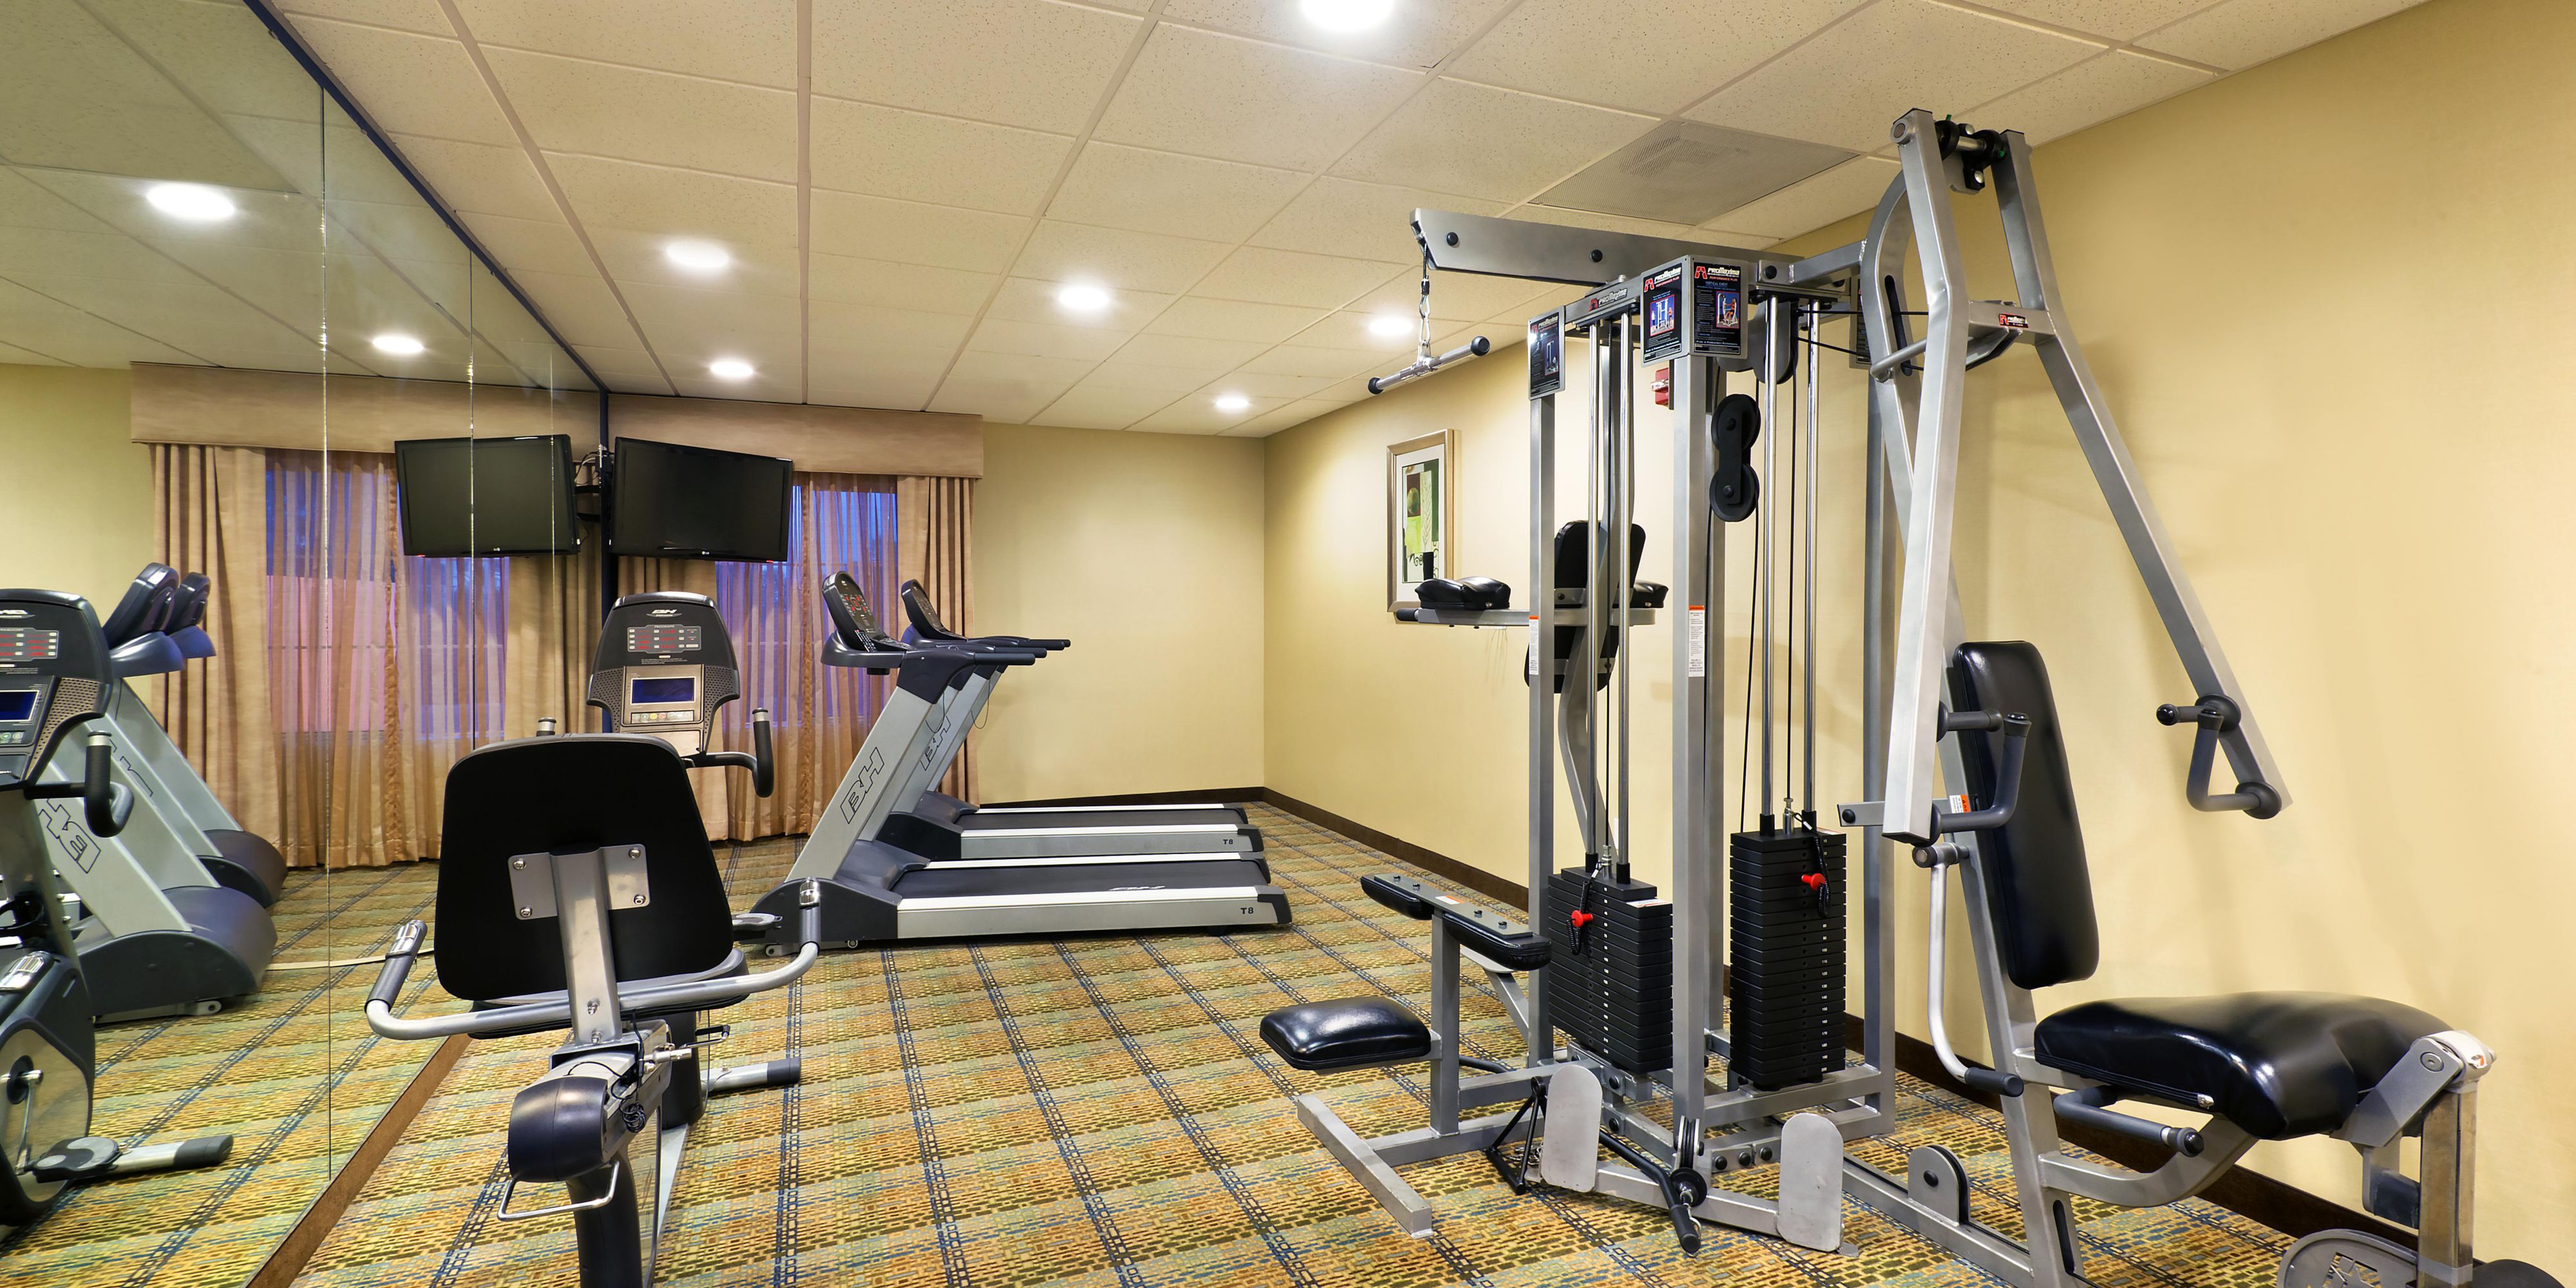 ***New Pictures coming soon**** Our expanded fitness center is open 24 hours and offers a variety of cardio and weight training options.